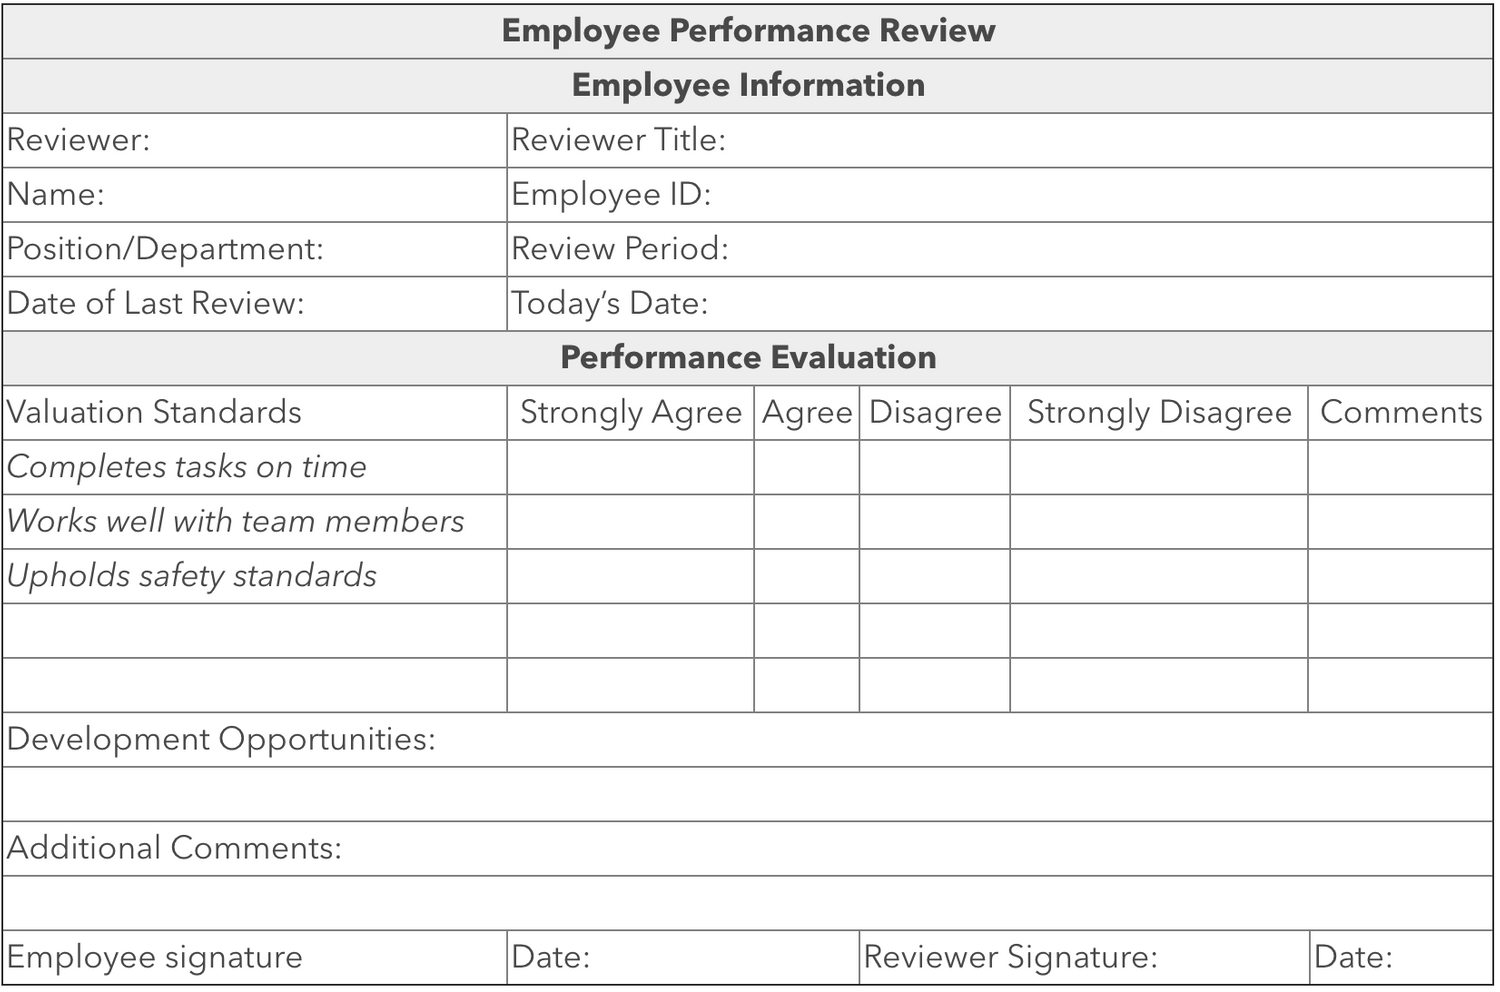 employee performance review examples